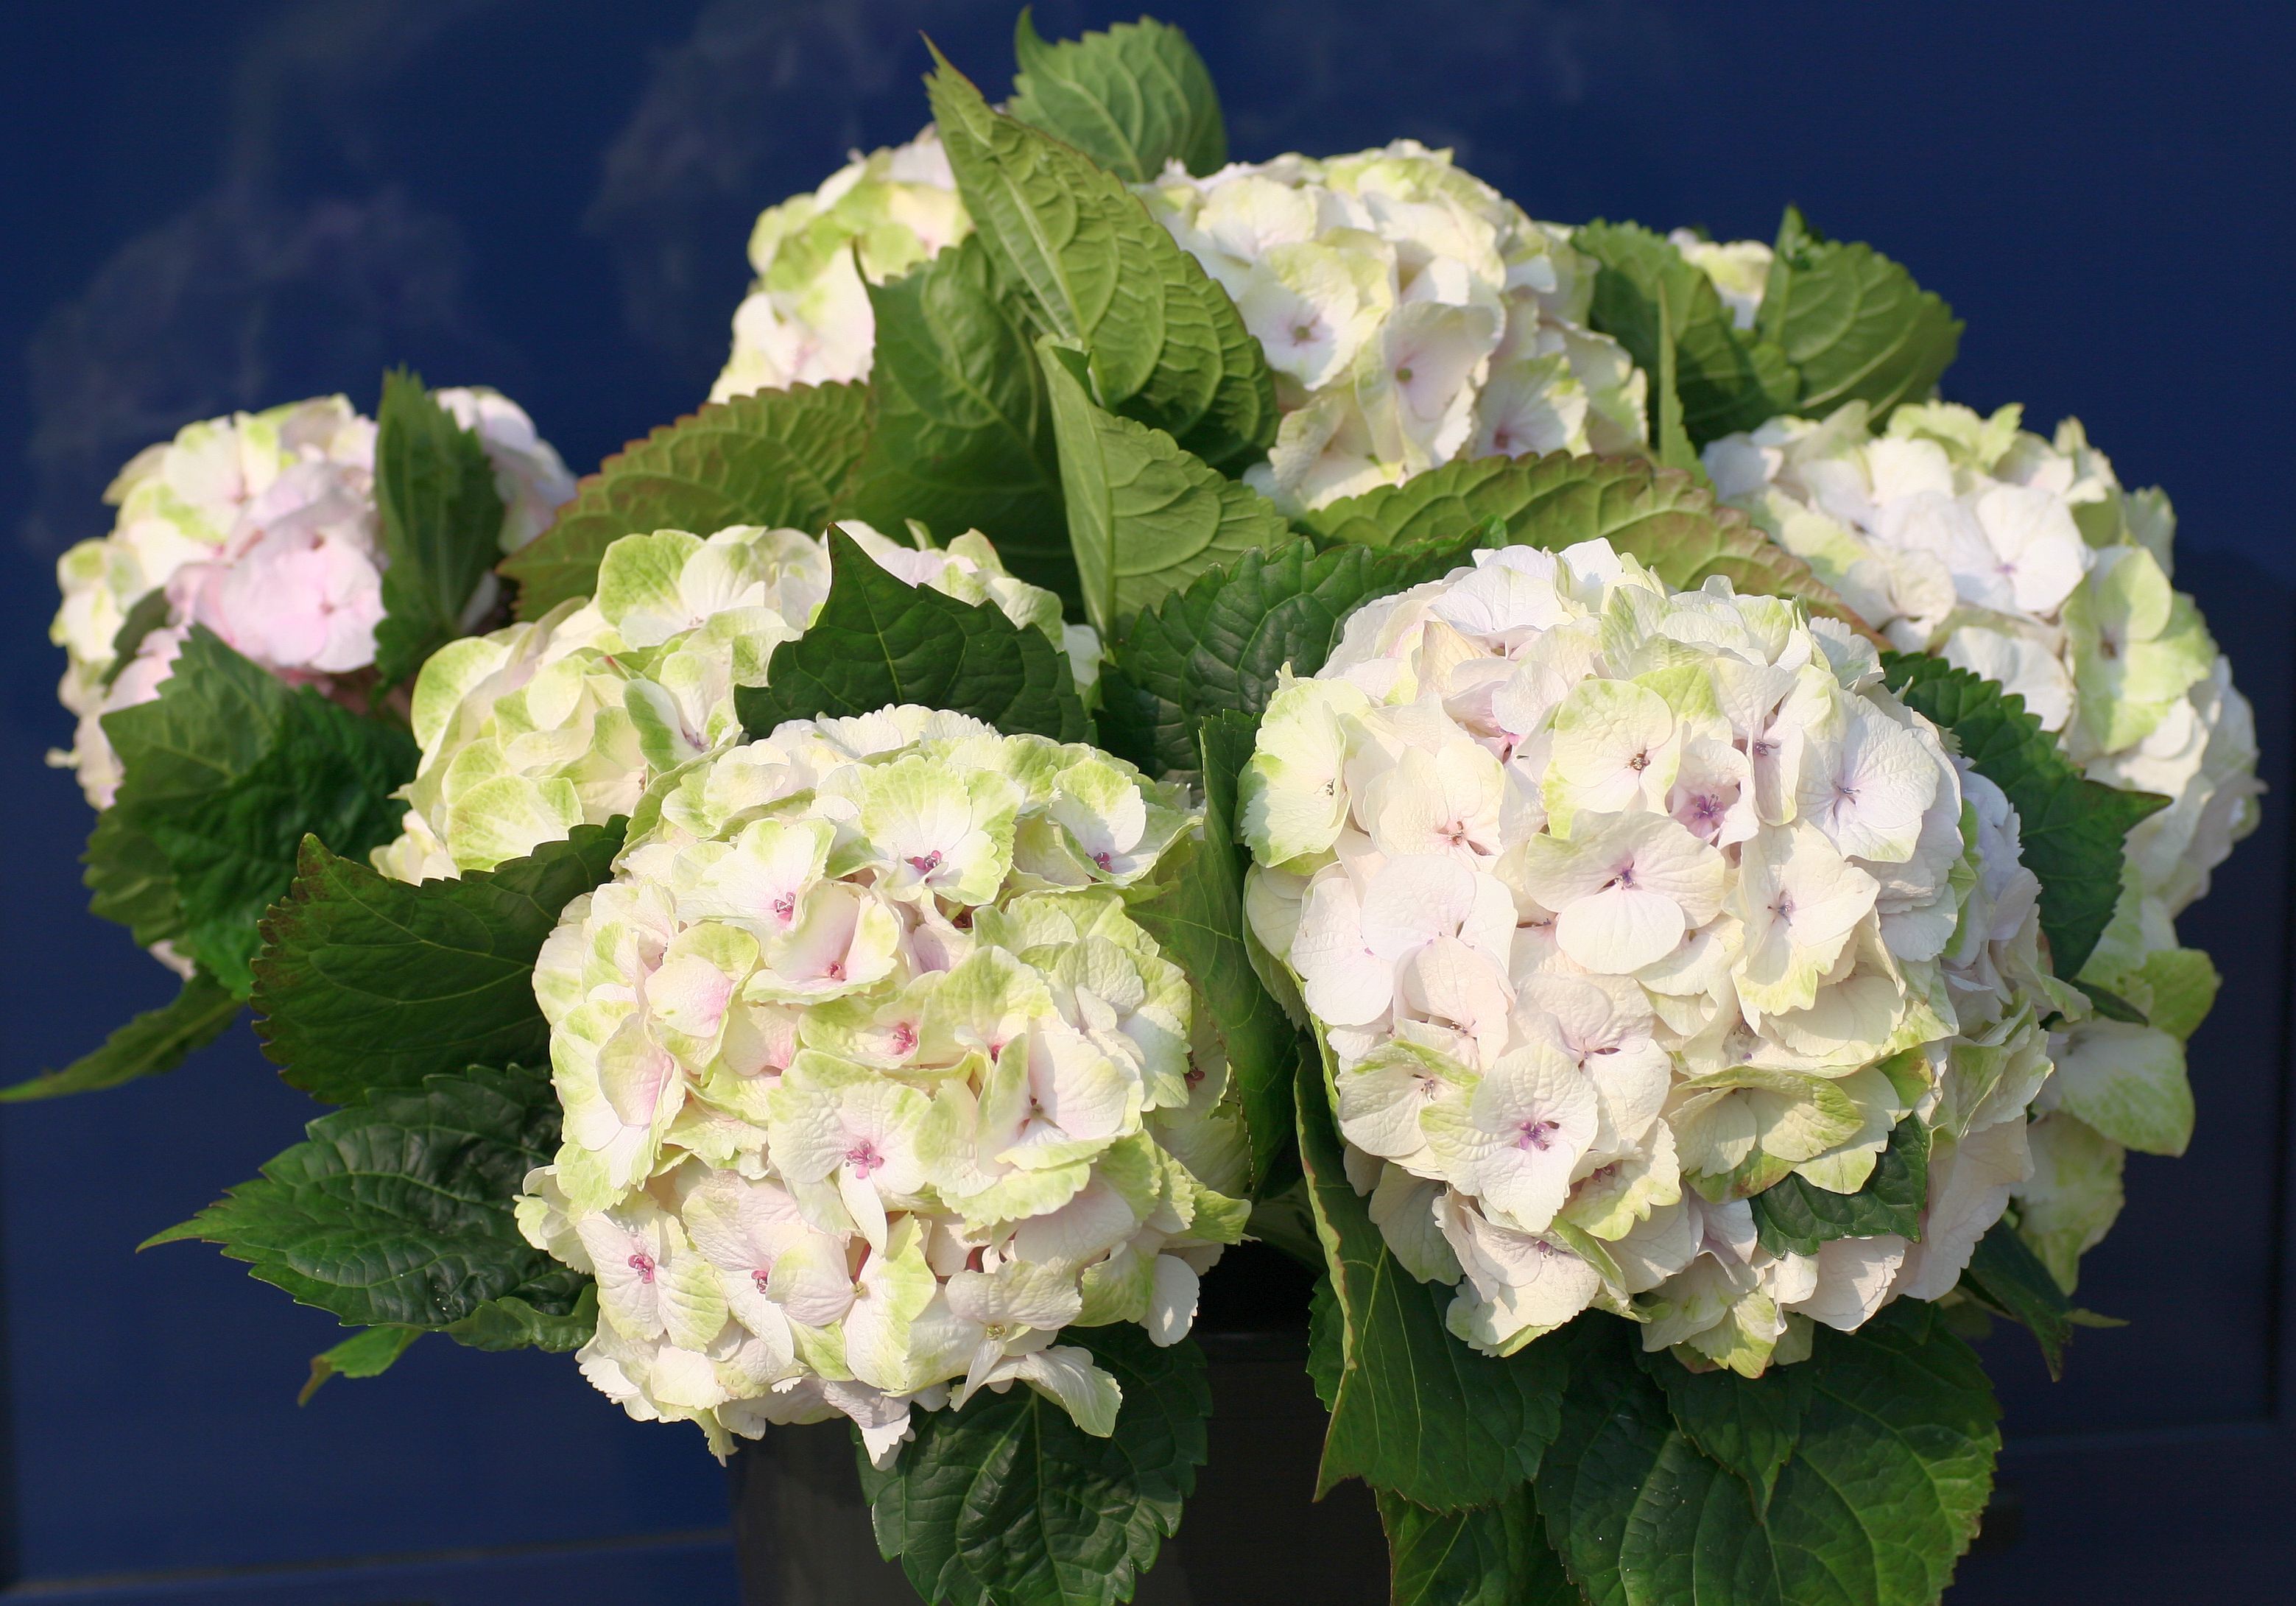 images/plants/hydrangea/hyd-magical-everlasting-noblesse/hyd-magical-everlasting-noblesse-0002.jpg